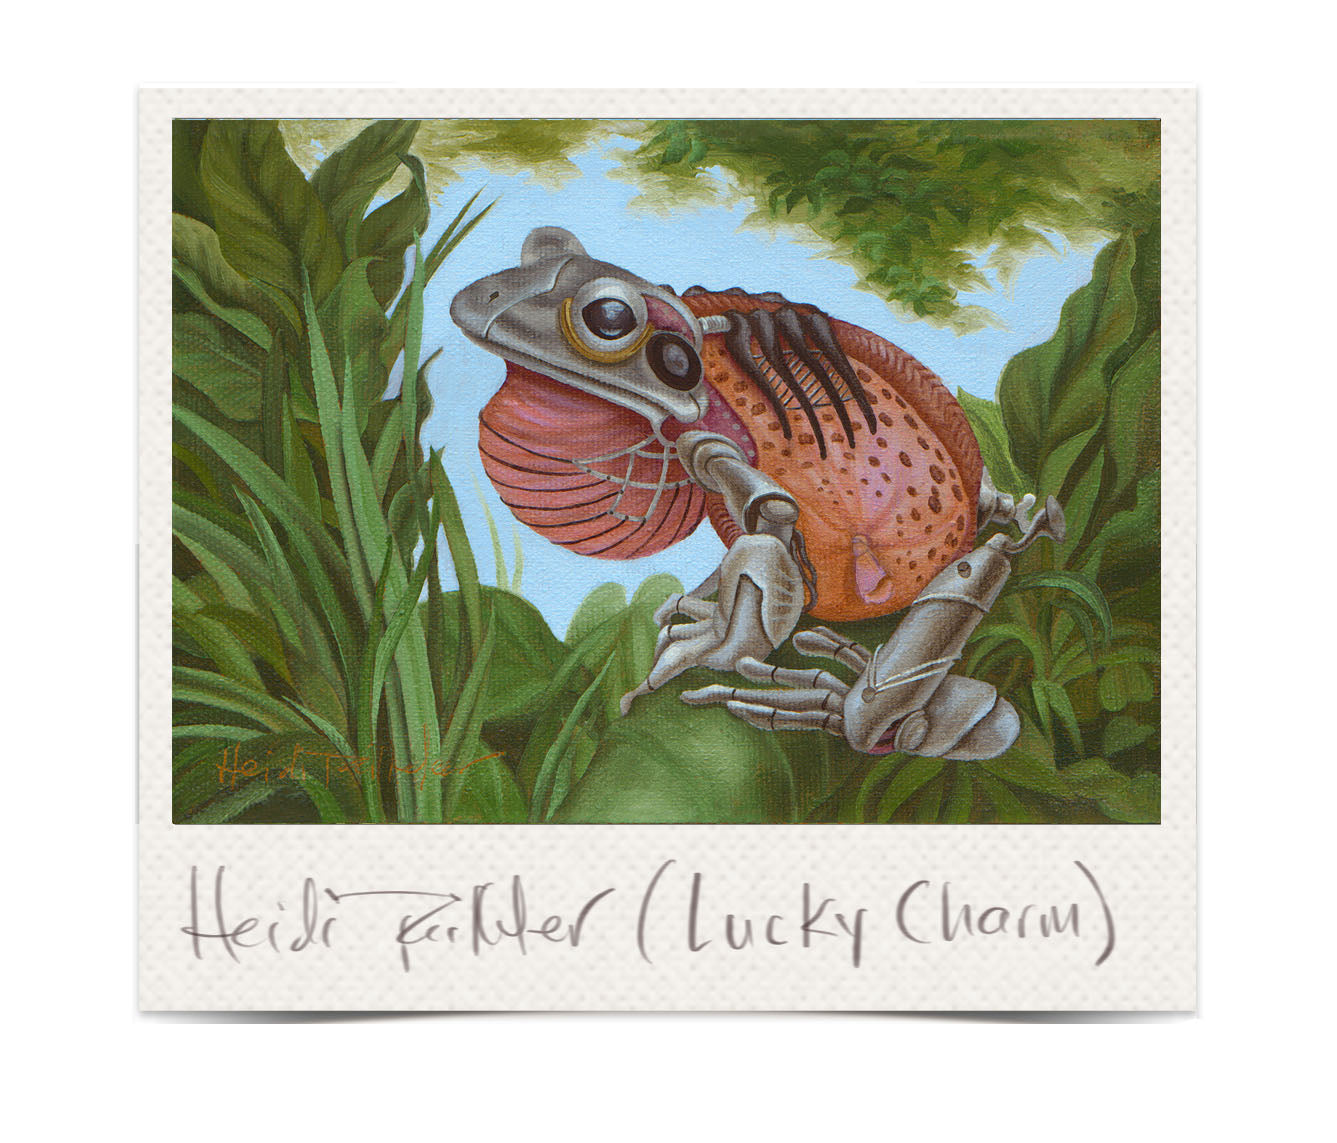 Lucky Charm 🍀 by Heidi Taillefer